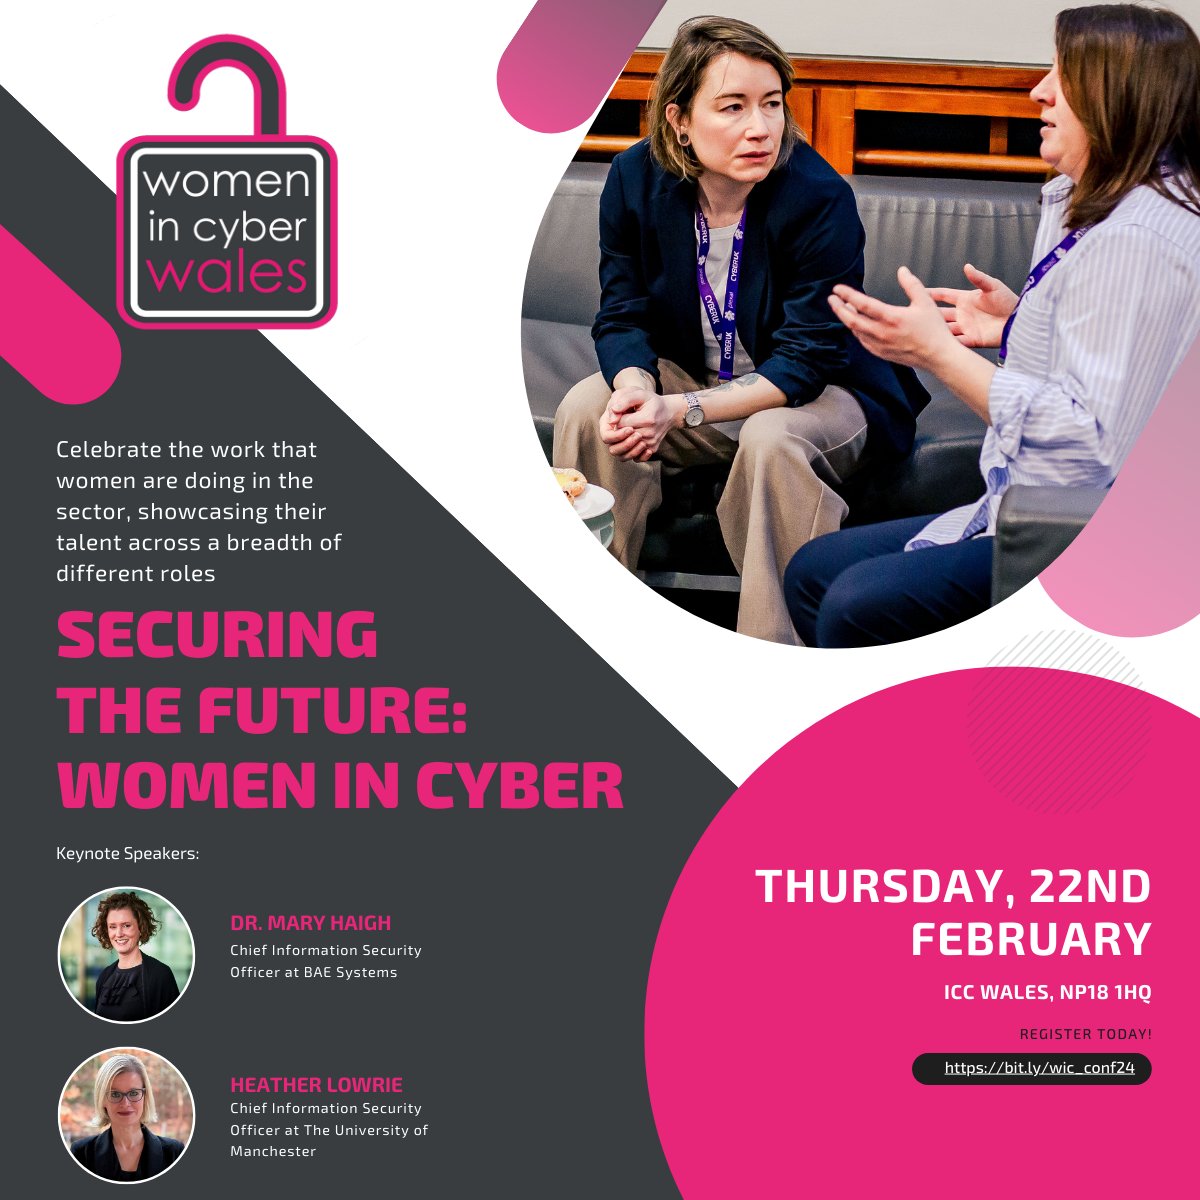 'Securing the Future: Women in Cyber', 22 Feb 2024, @ICCWales. Speakers will discuss the current cyber security landscape, and sessions include leadership, networking and mentoring. Book now eventbrite.co.uk/e/securing-the… #cyberwales #womenincyber @NCSC